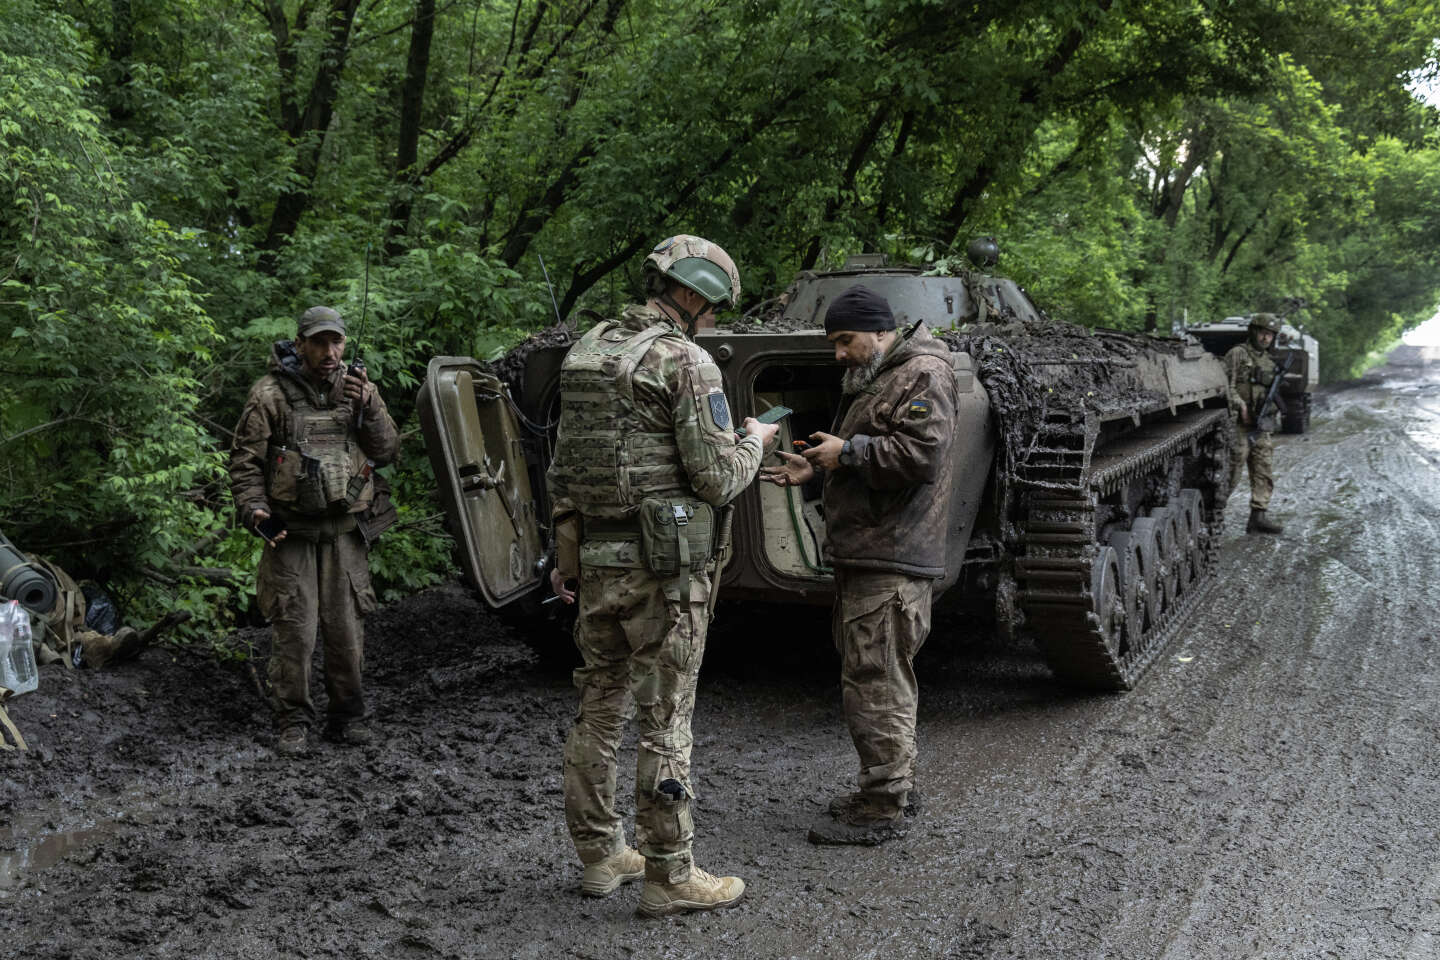 Ukraine has launched its counter-offensive